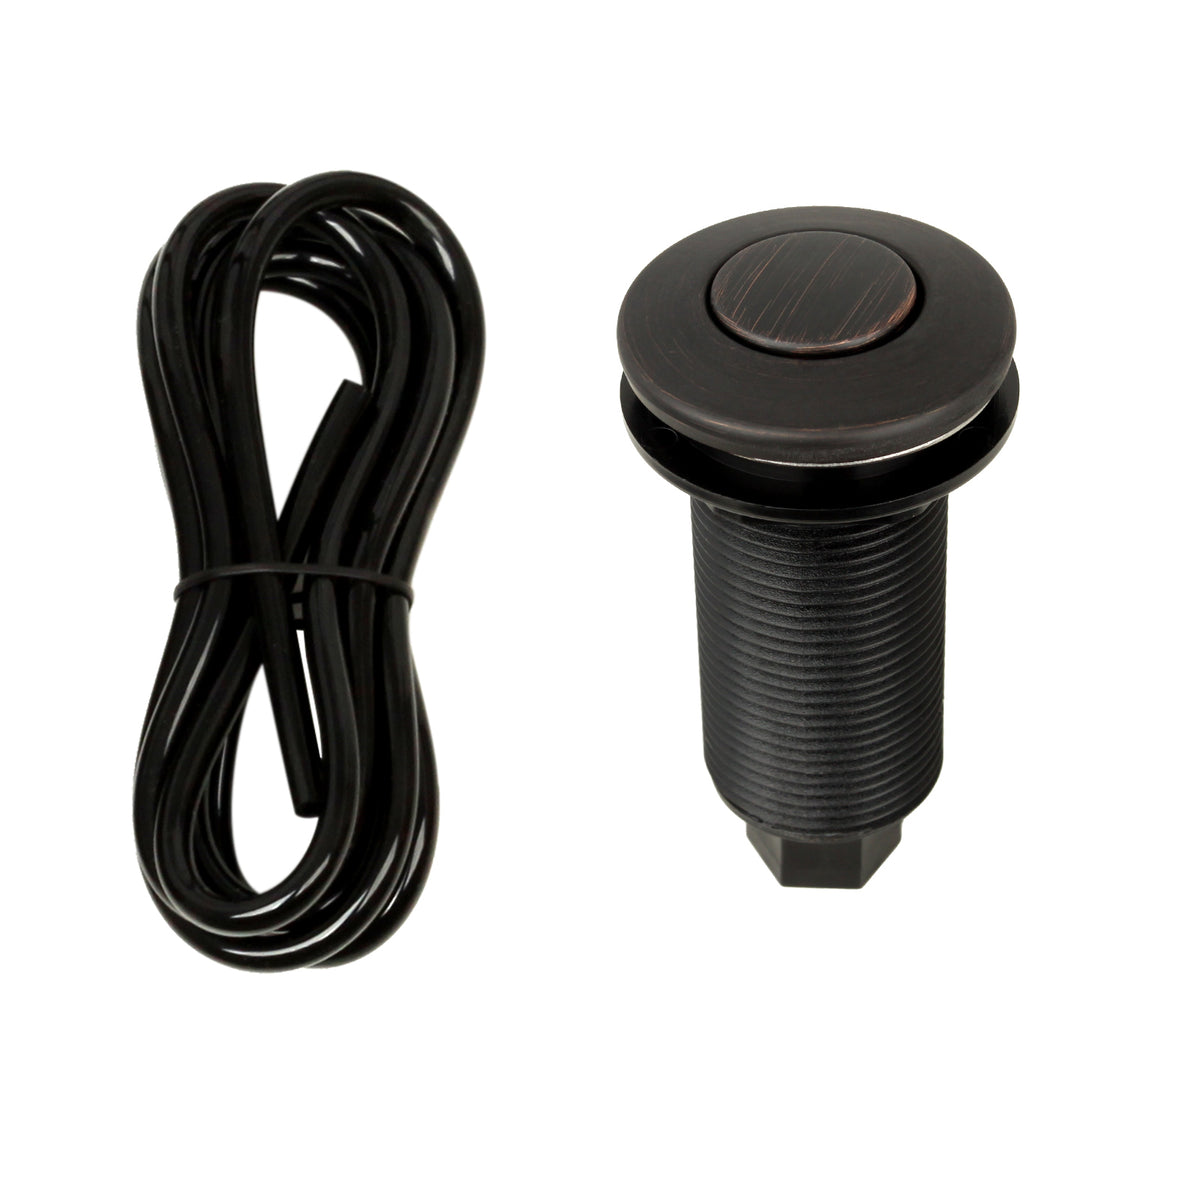 Oil Rubbed Bronze Garbage Disposal Air Switch with Air Hose - AK79001-ORB